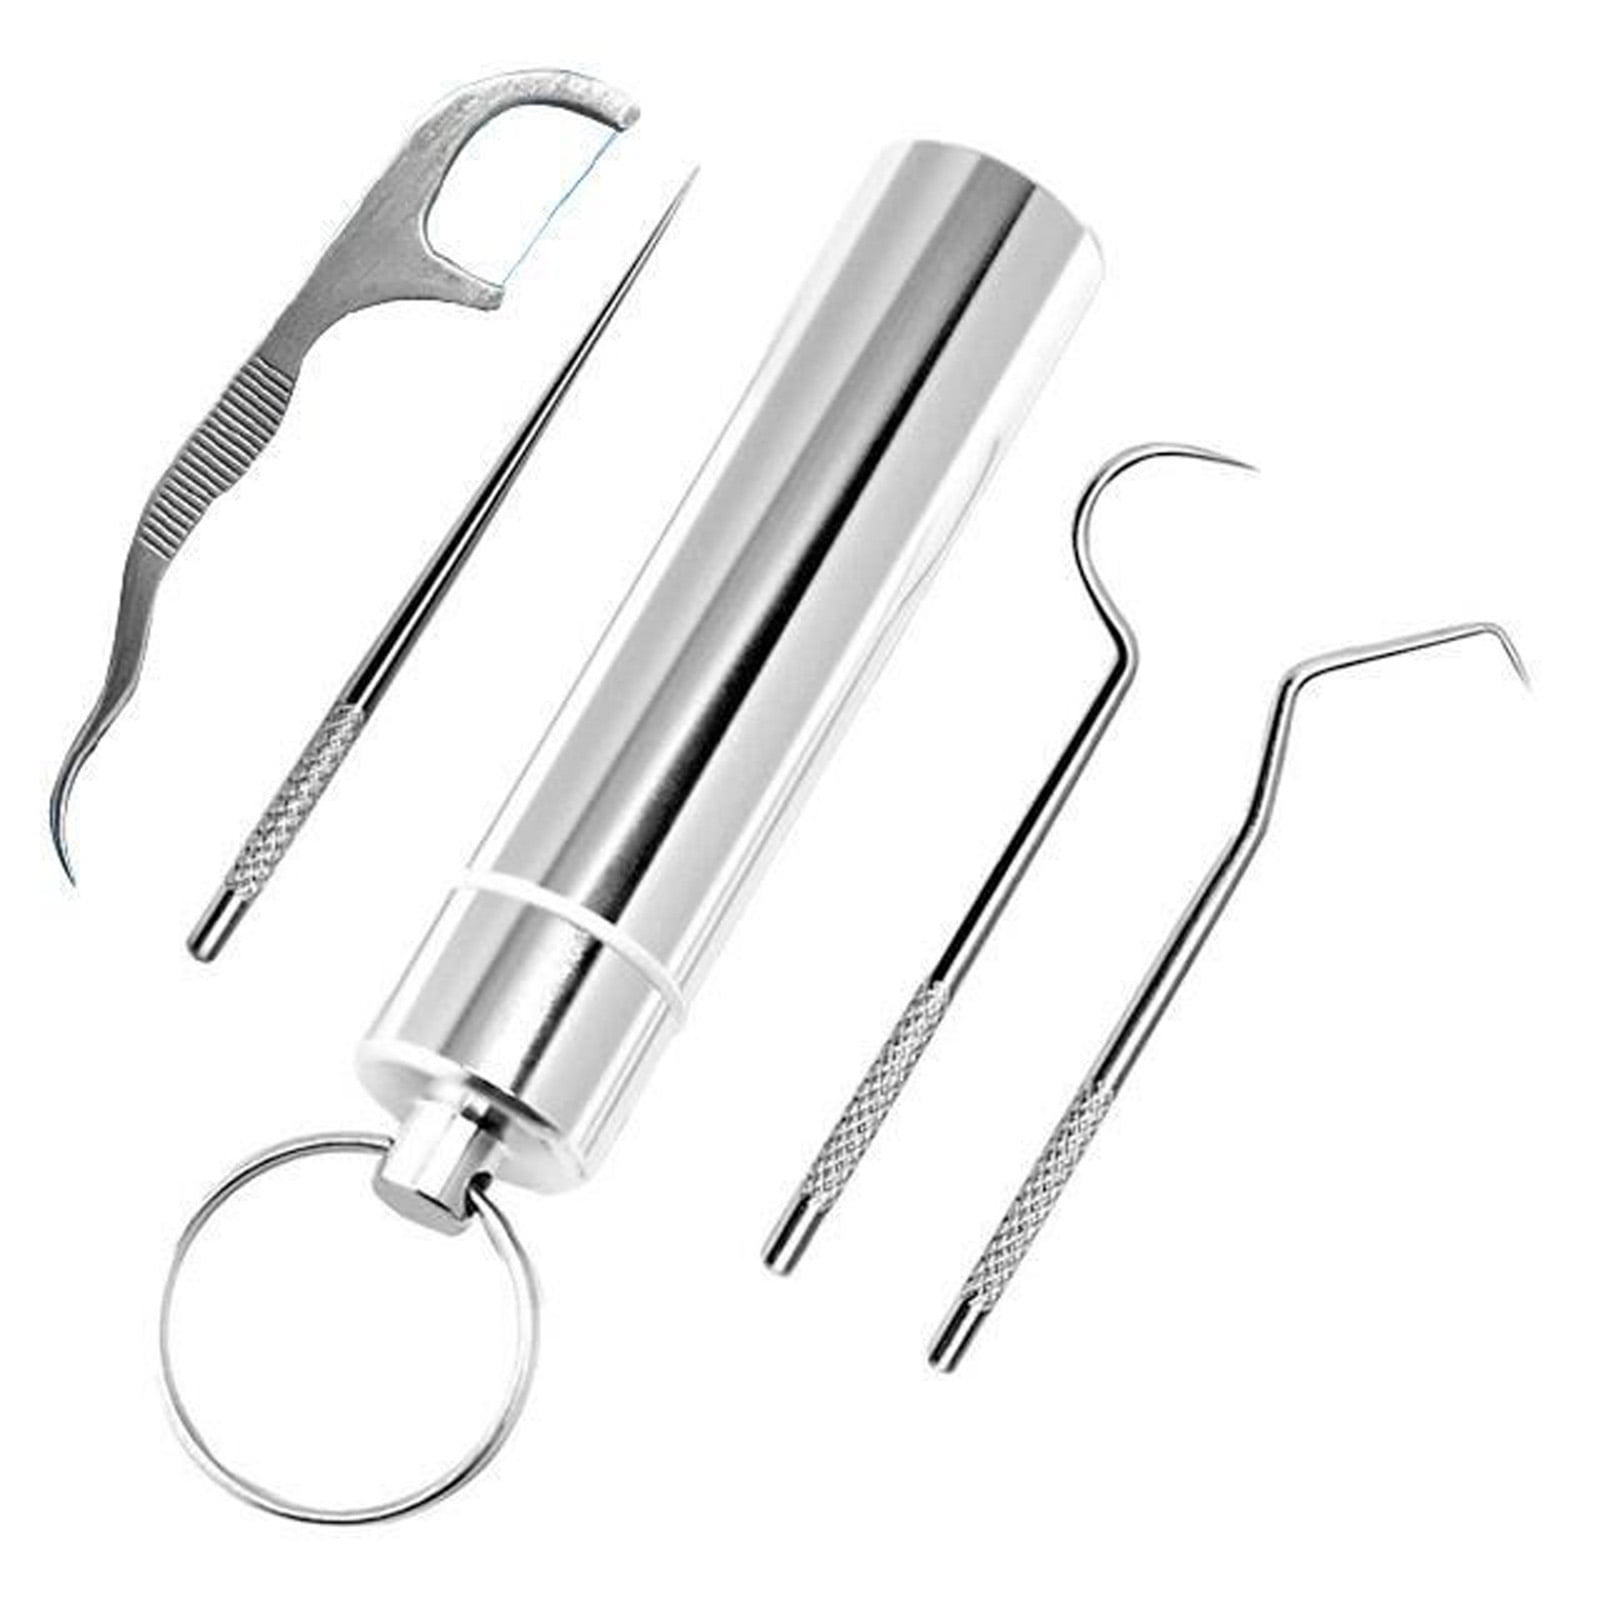 Kitcheniva Stainless Steel Oven Grill Cleaning Tool, 1 Pcs - Kroger